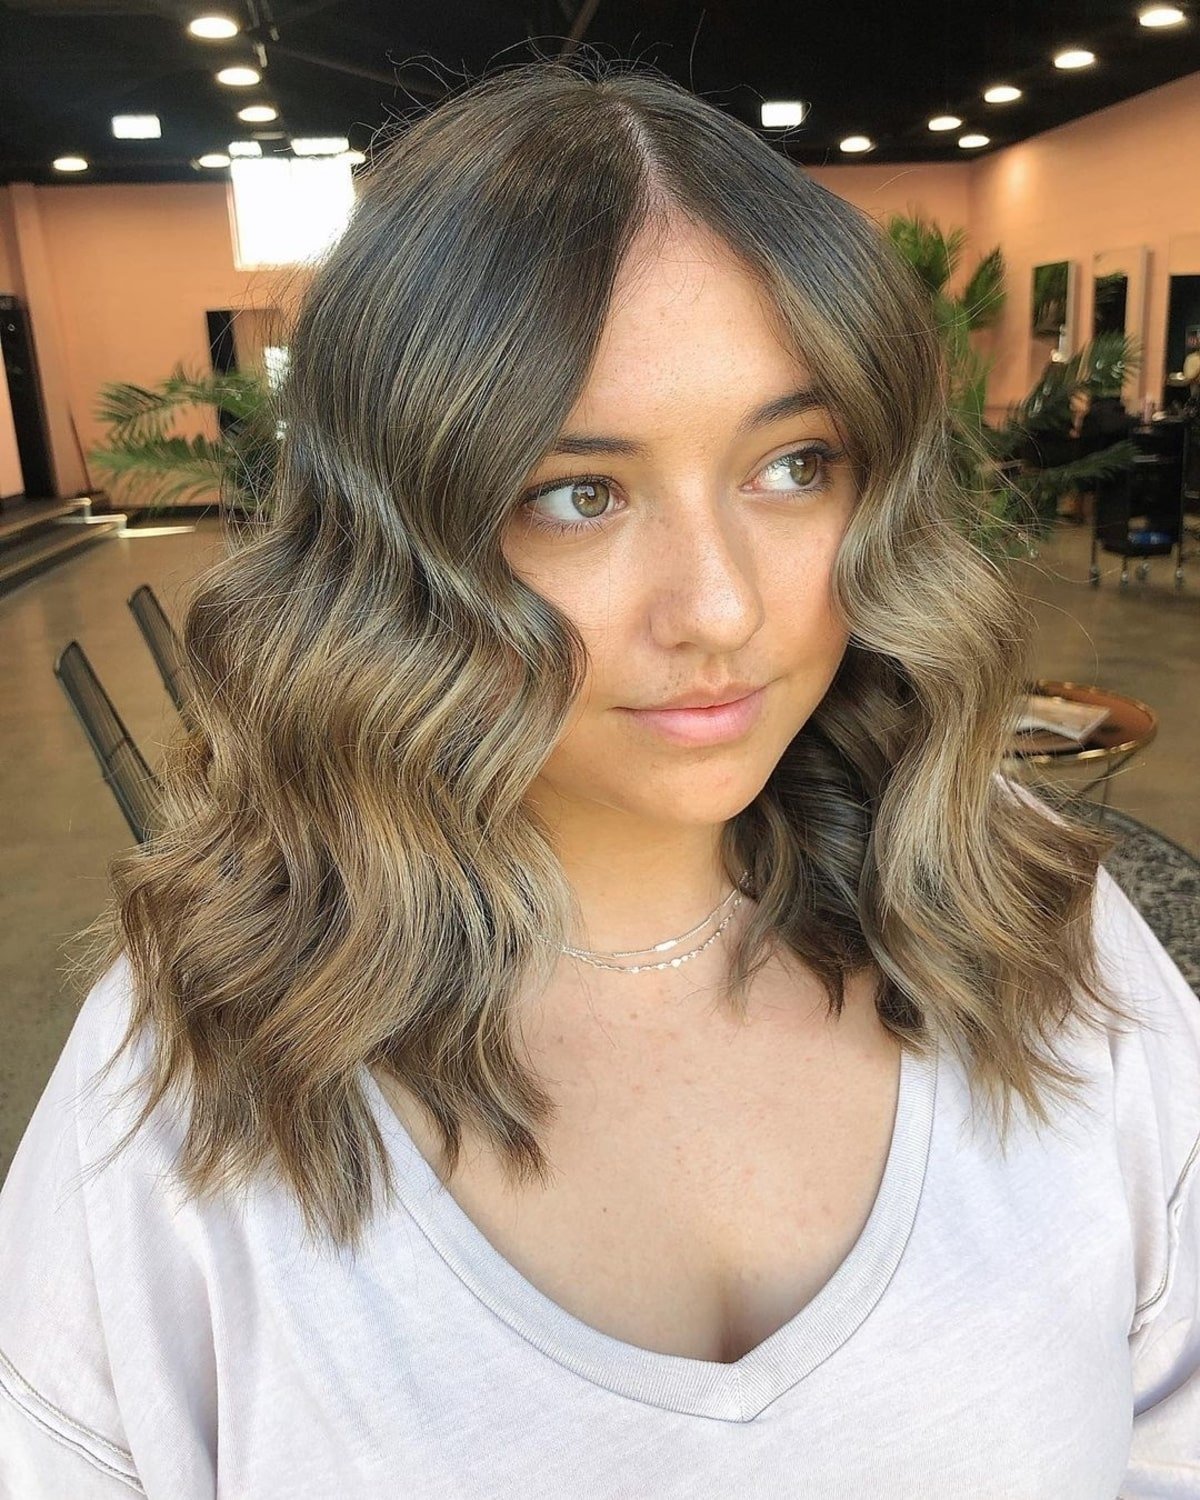 Mid-Length Beach Waves with a Center Part for a Round Face